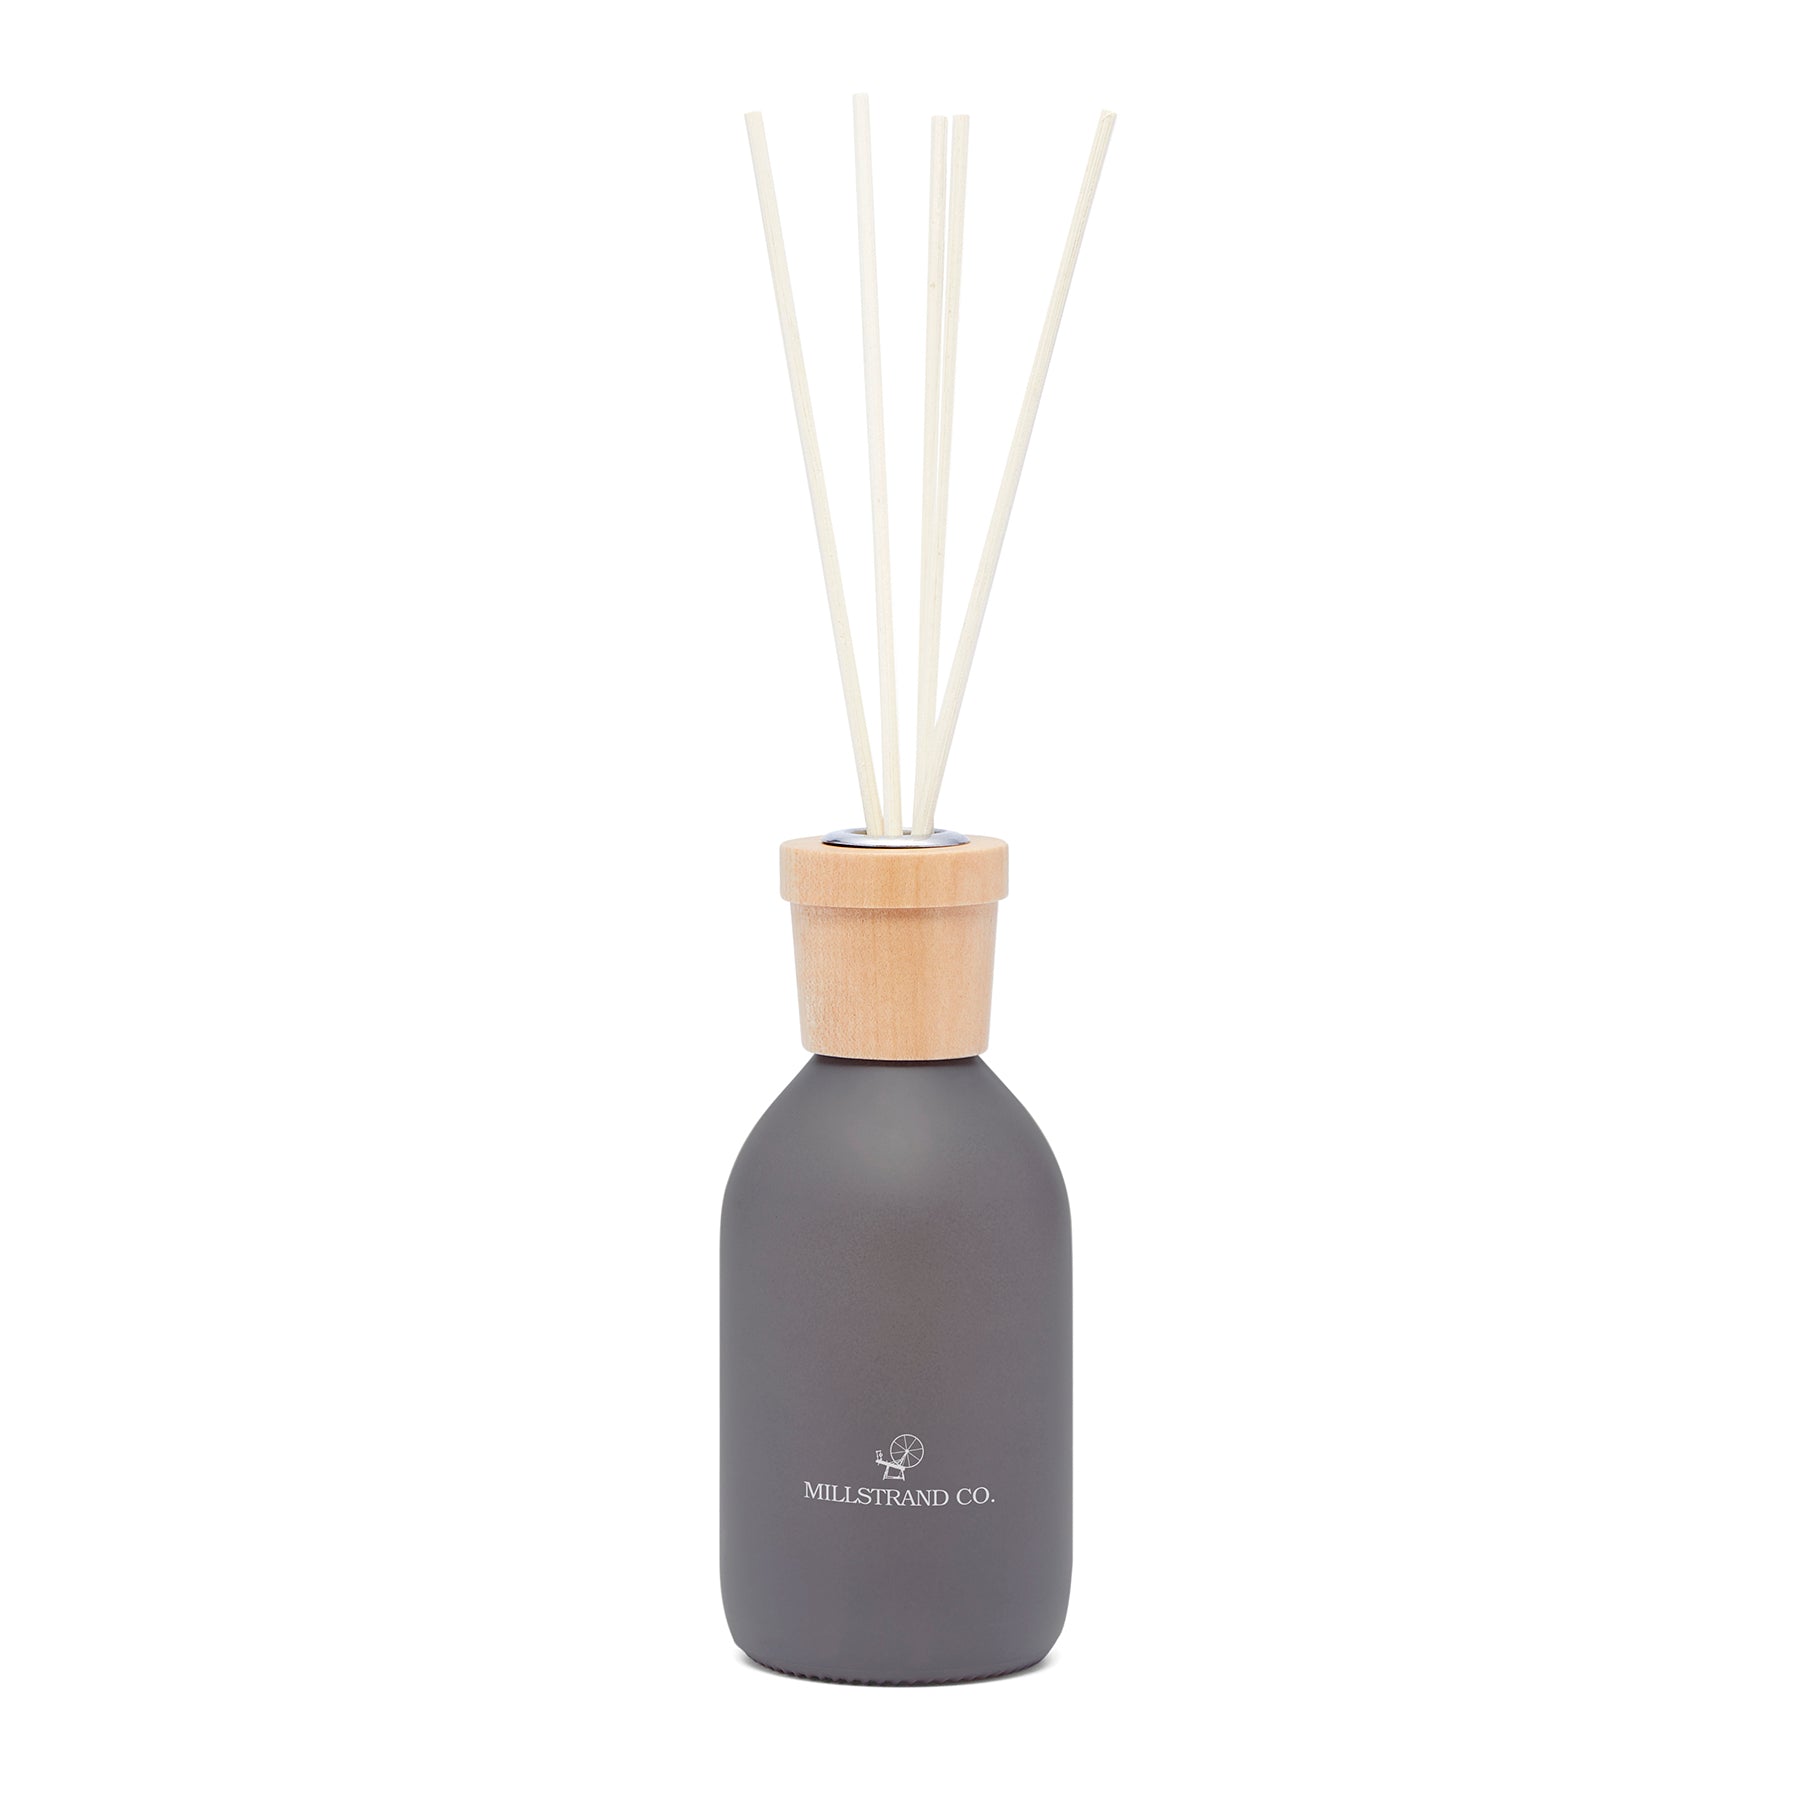 Millstrand Co. Serenity Collection – Reed Diffuser in Daffodils & Daisies 8.82oz